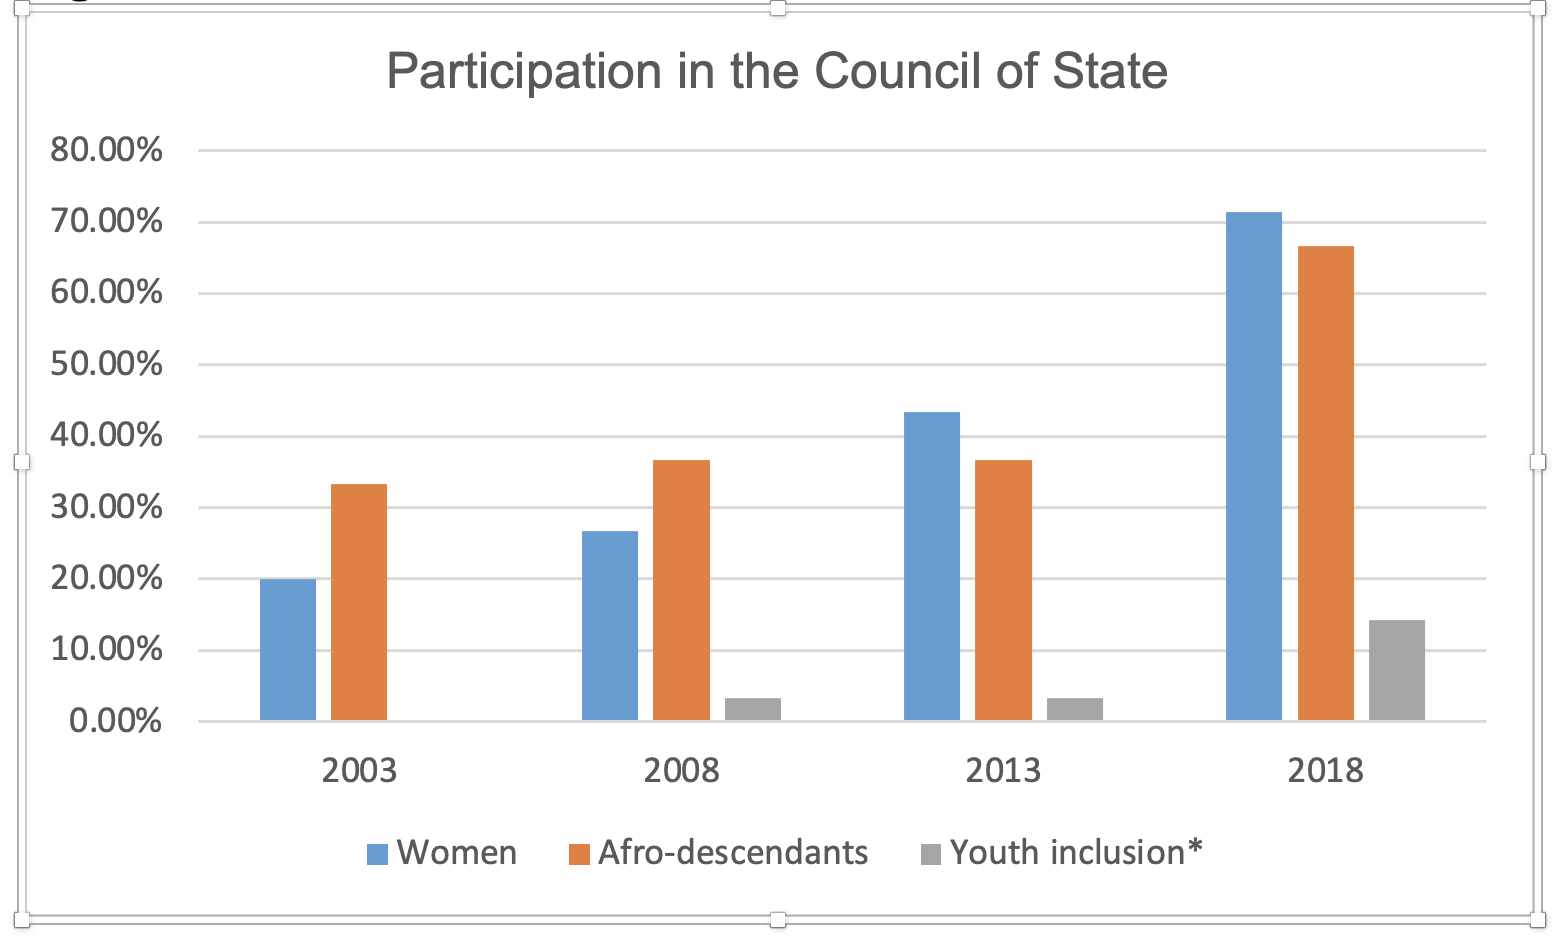 Figure 6 - Participation in the Council of State by women in blue, men in red and younger members in grey